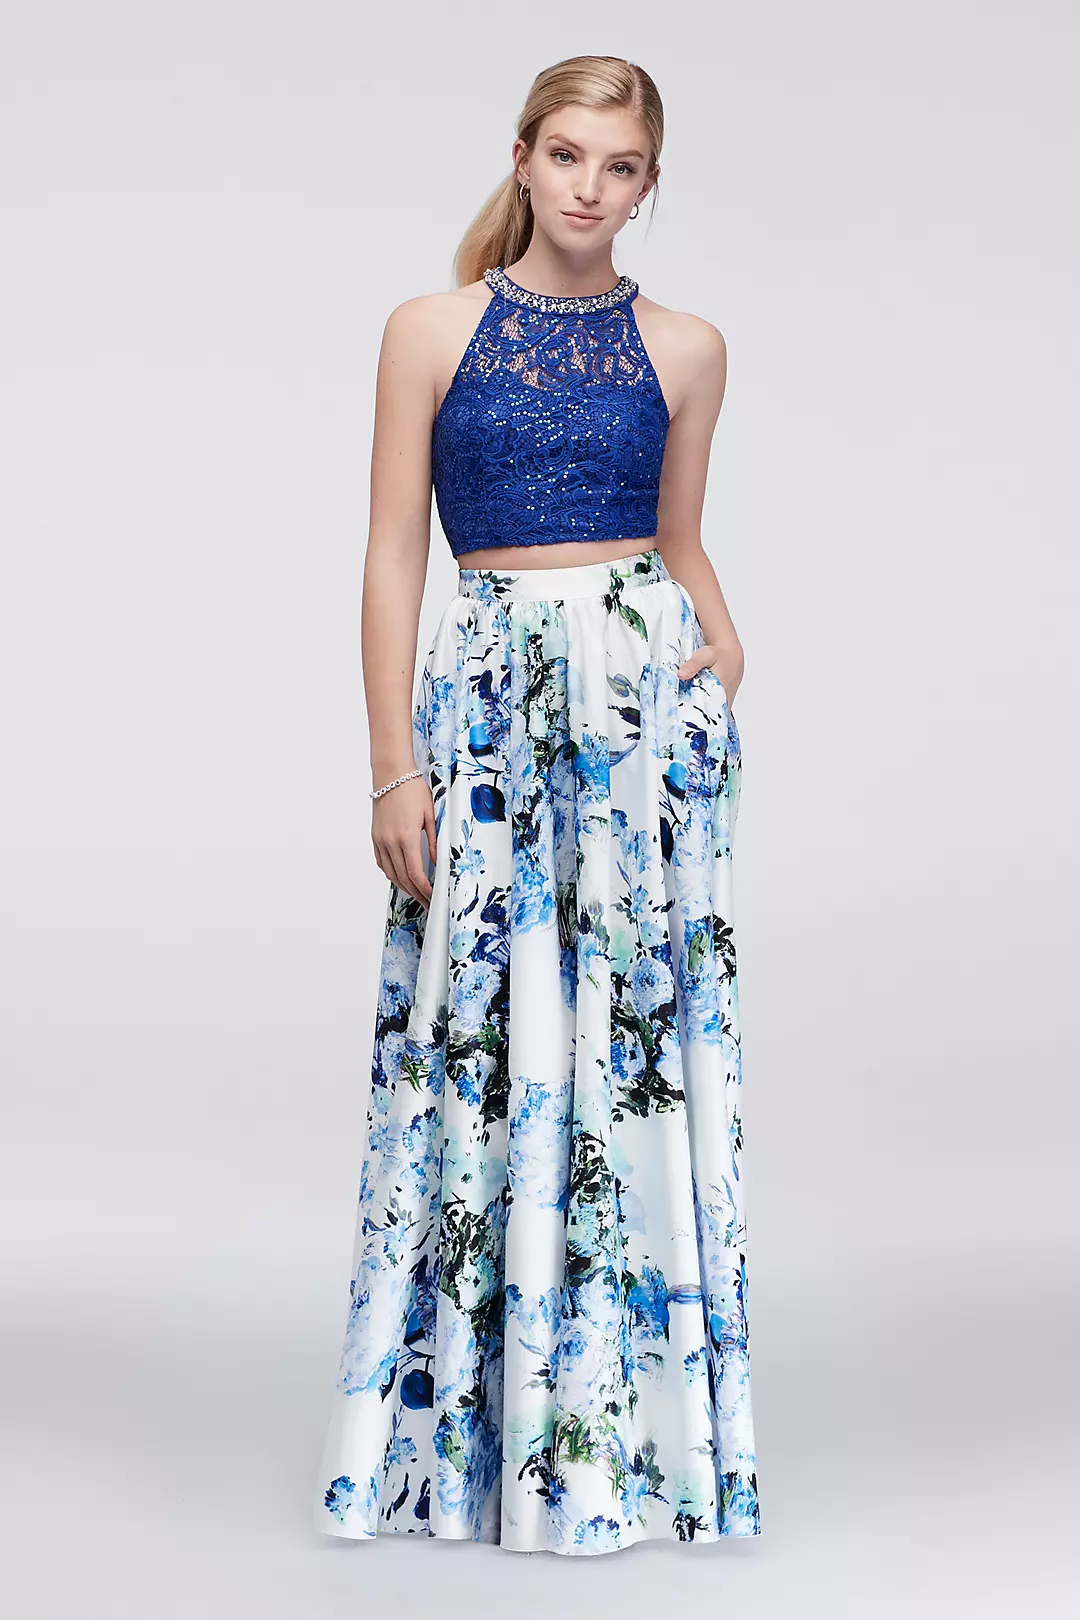 Sequin Lace Top and Floral Skirt Two-Piece Dress Image